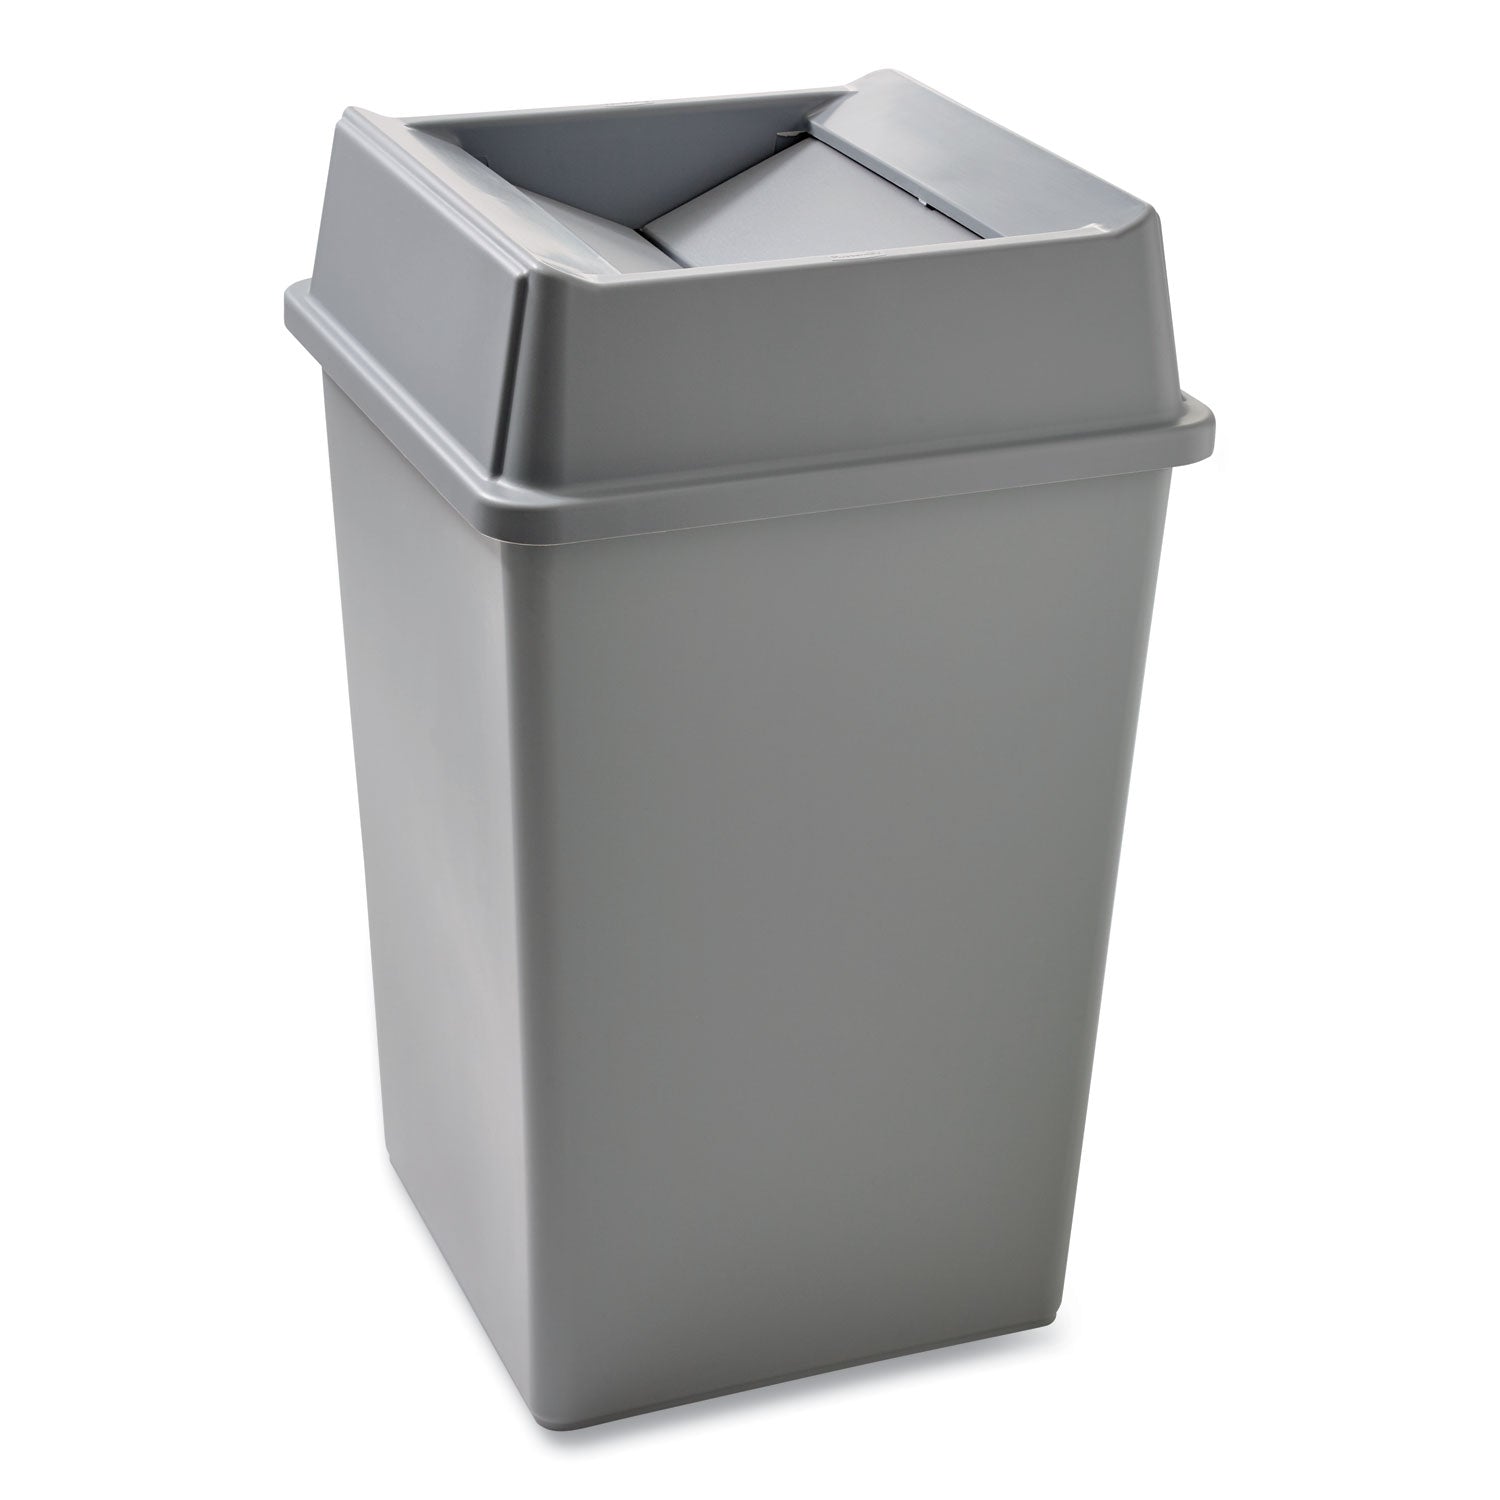 Untouchable Waste Container, Square, Plastic, 35gal, Gray - 2